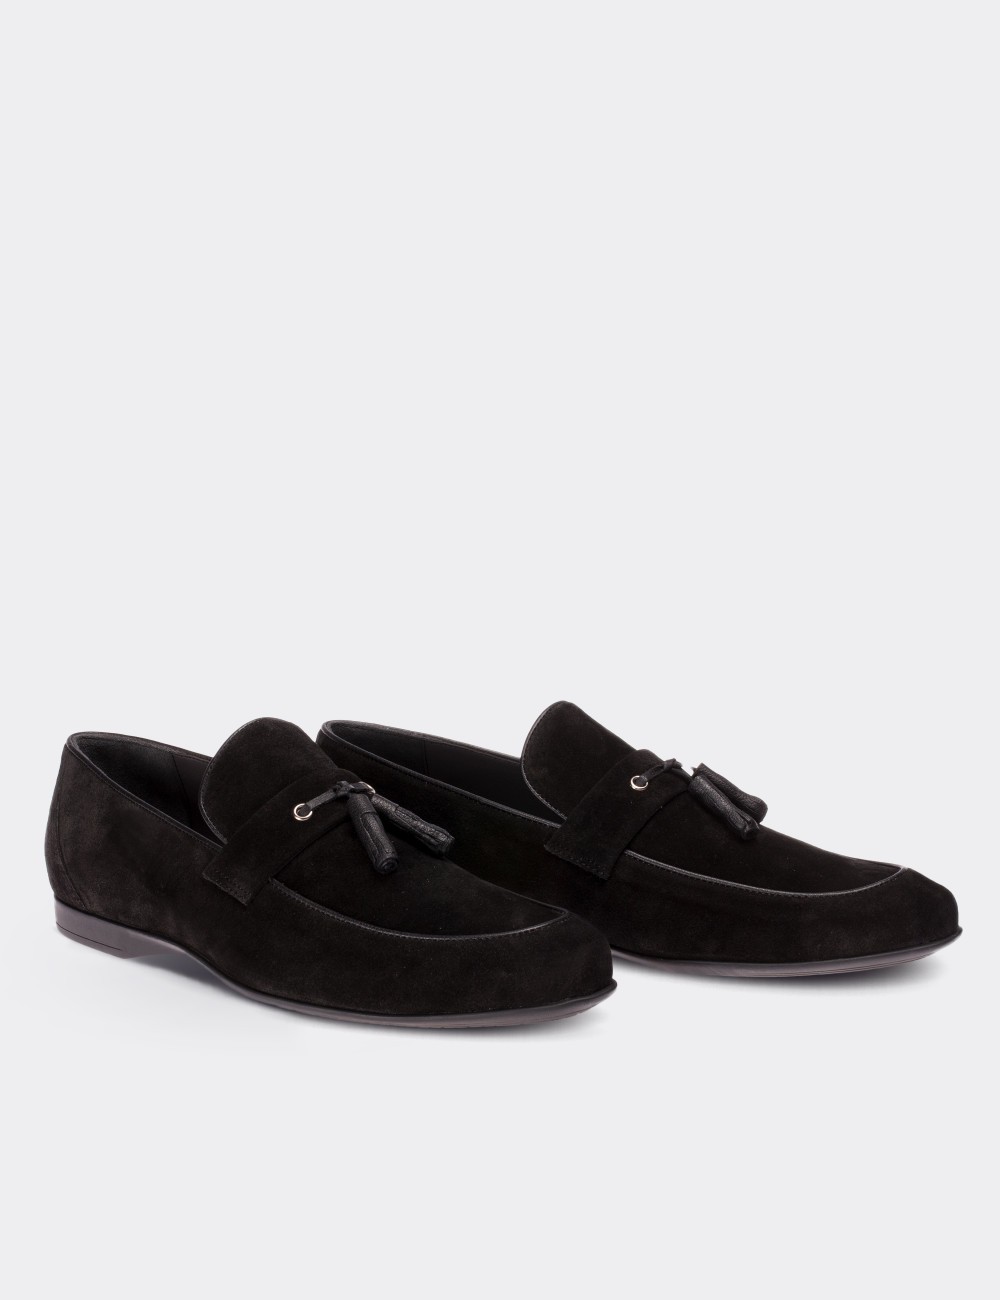 Black Suede Leather Loafers & Moccasins Shoes - Deery